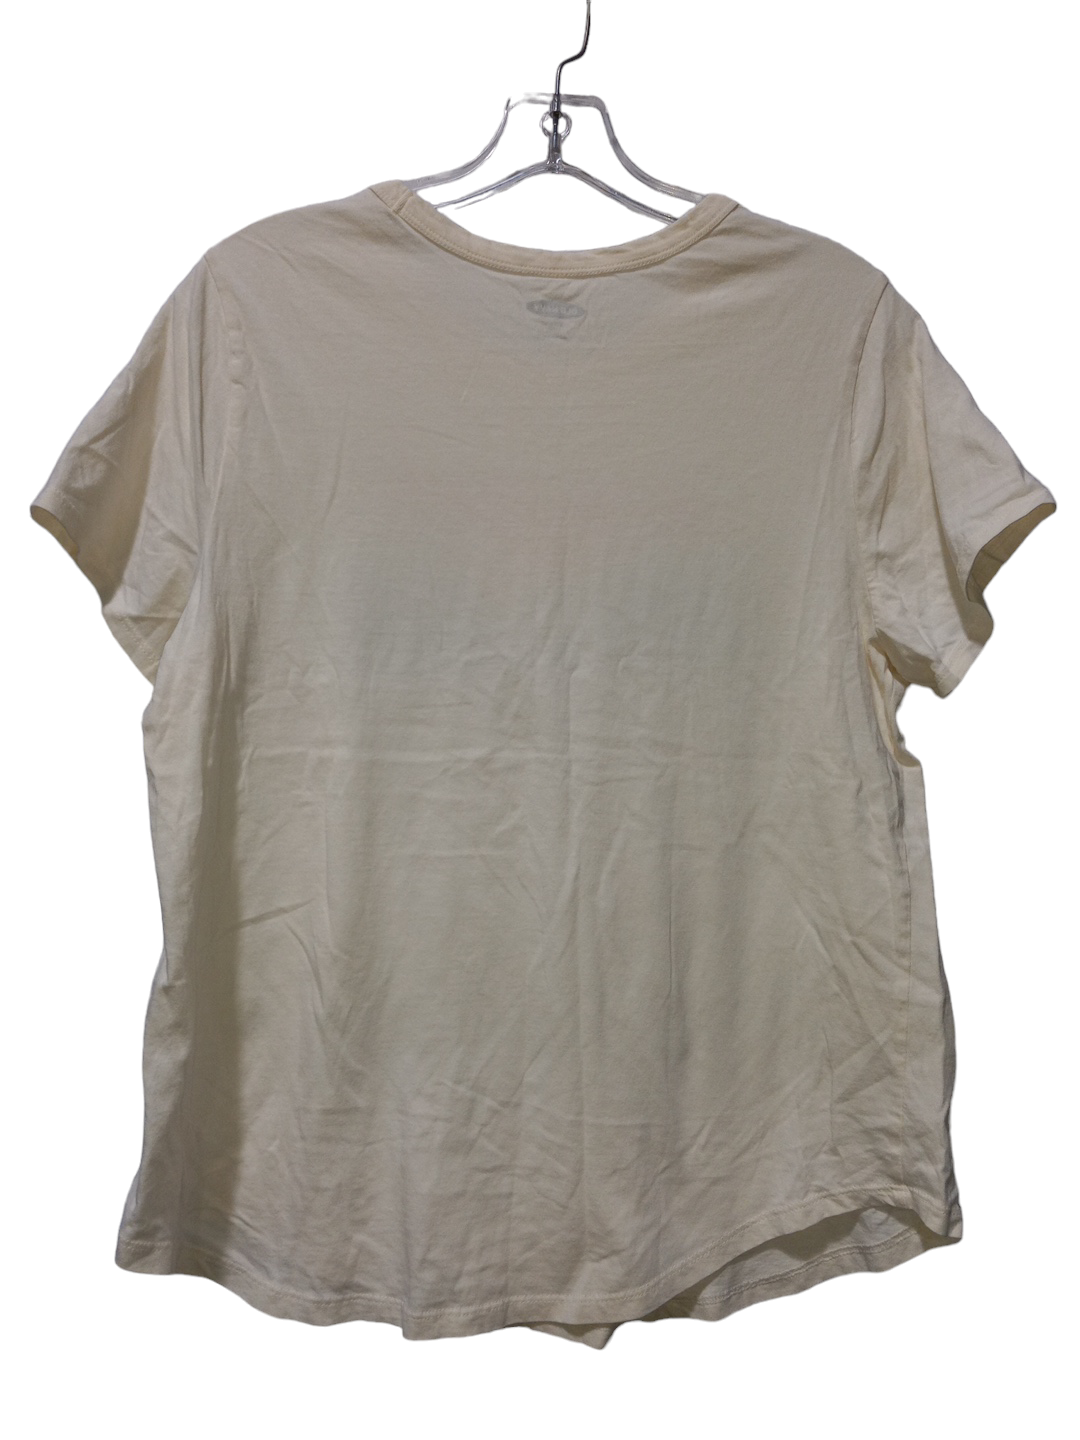 Cream Top Short Sleeve Old Navy, Size L